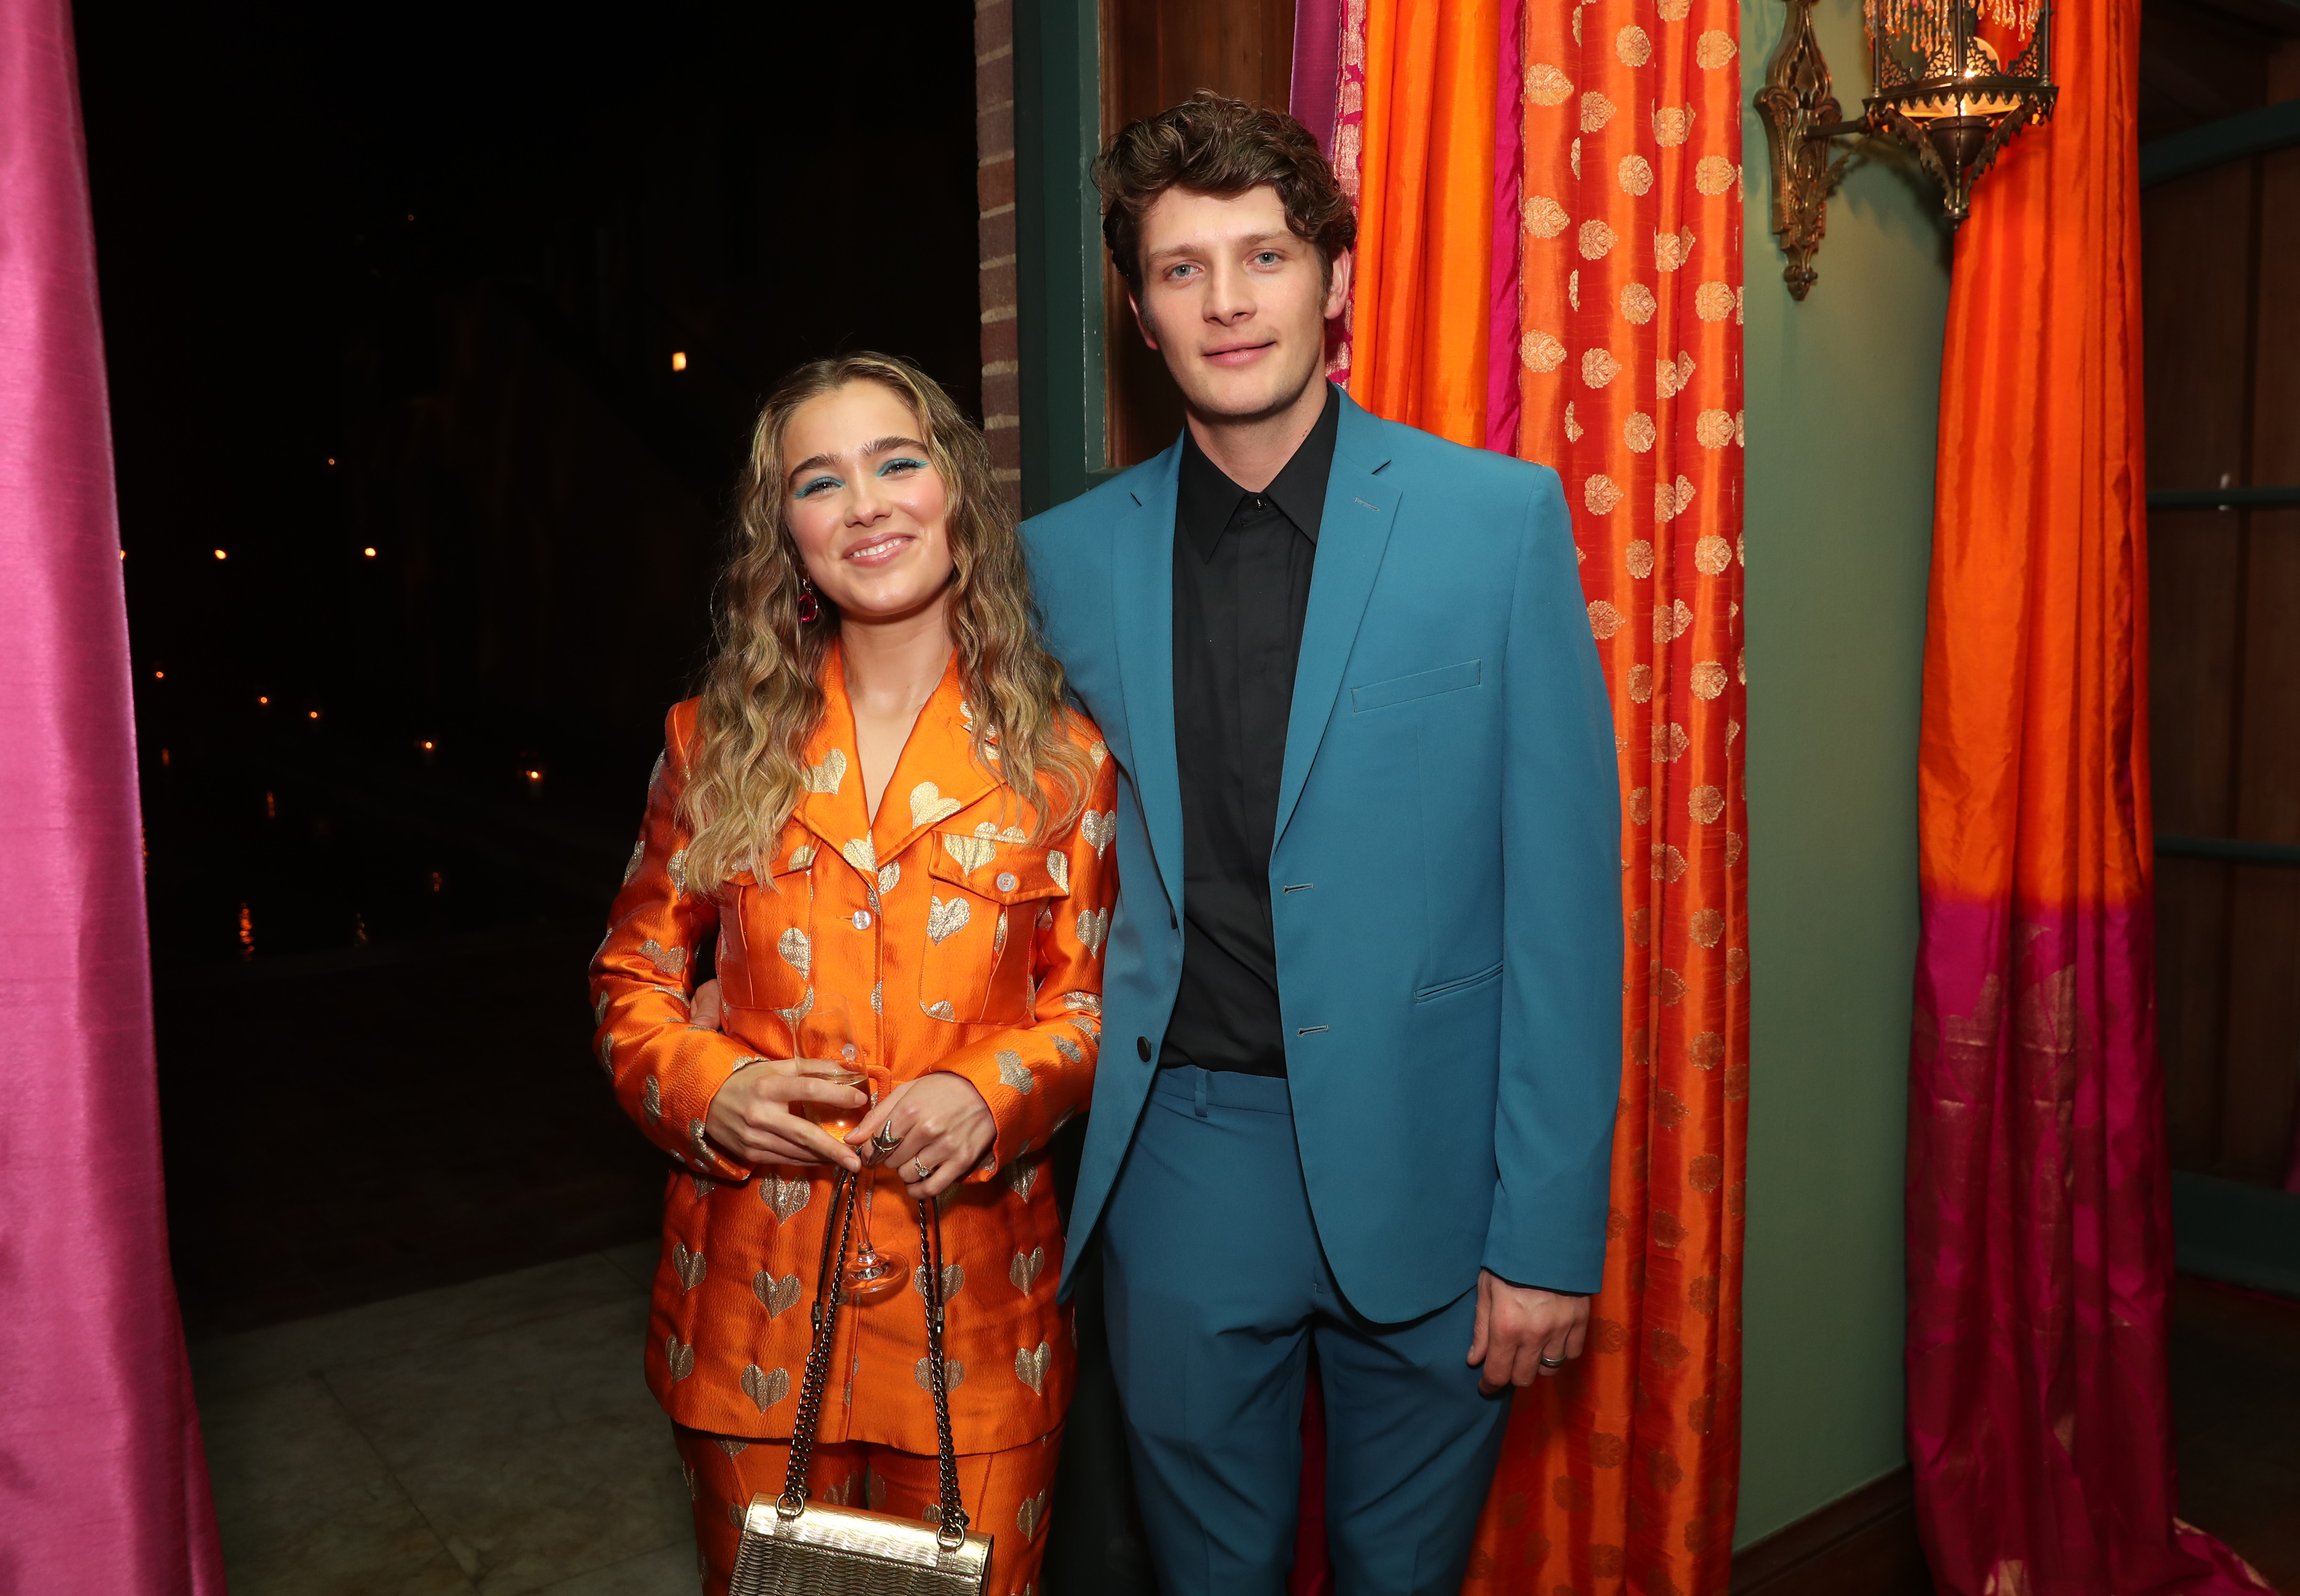 Haley Lu Richardson and Brett Dier at the Christian Louboutin and Laura Brown's supper party in Los Angeles on December 5, 2019 | Source: Getty Images